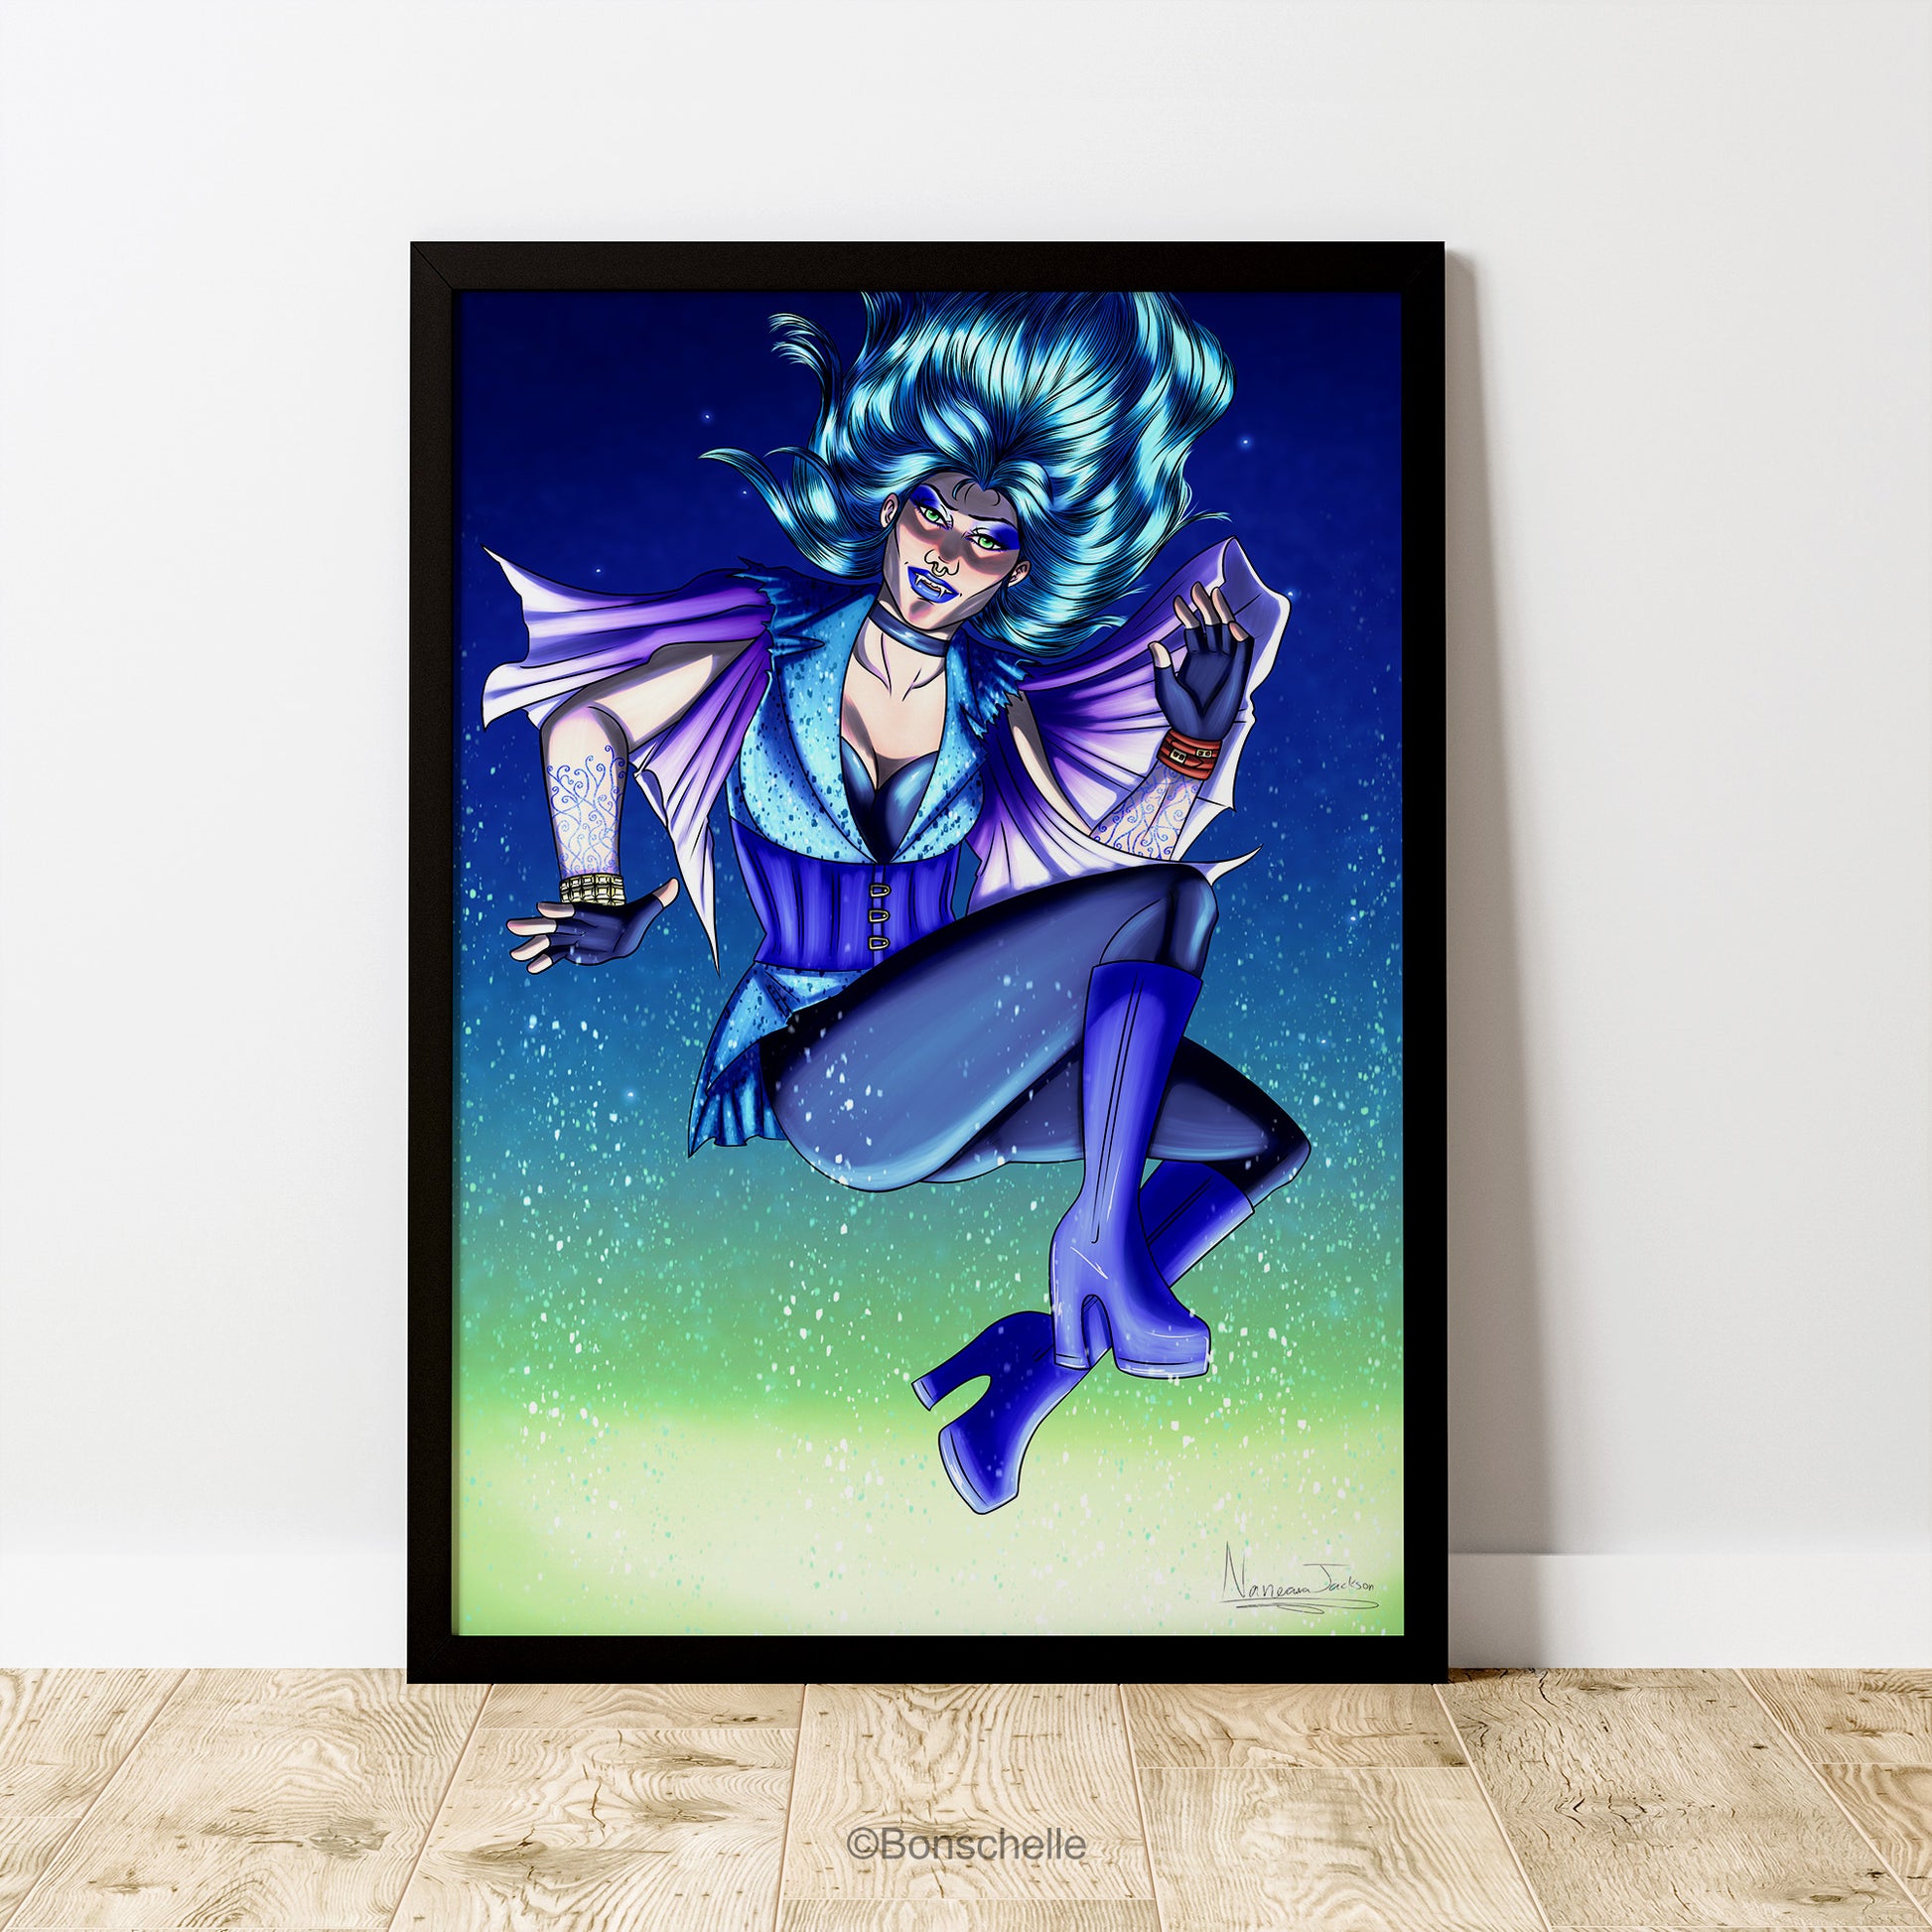 An original art print in which a vampire-witch with electric-blue hair flies in the air while the snow falls. The print is framed in black, sits on a wooden floor against a white wall.